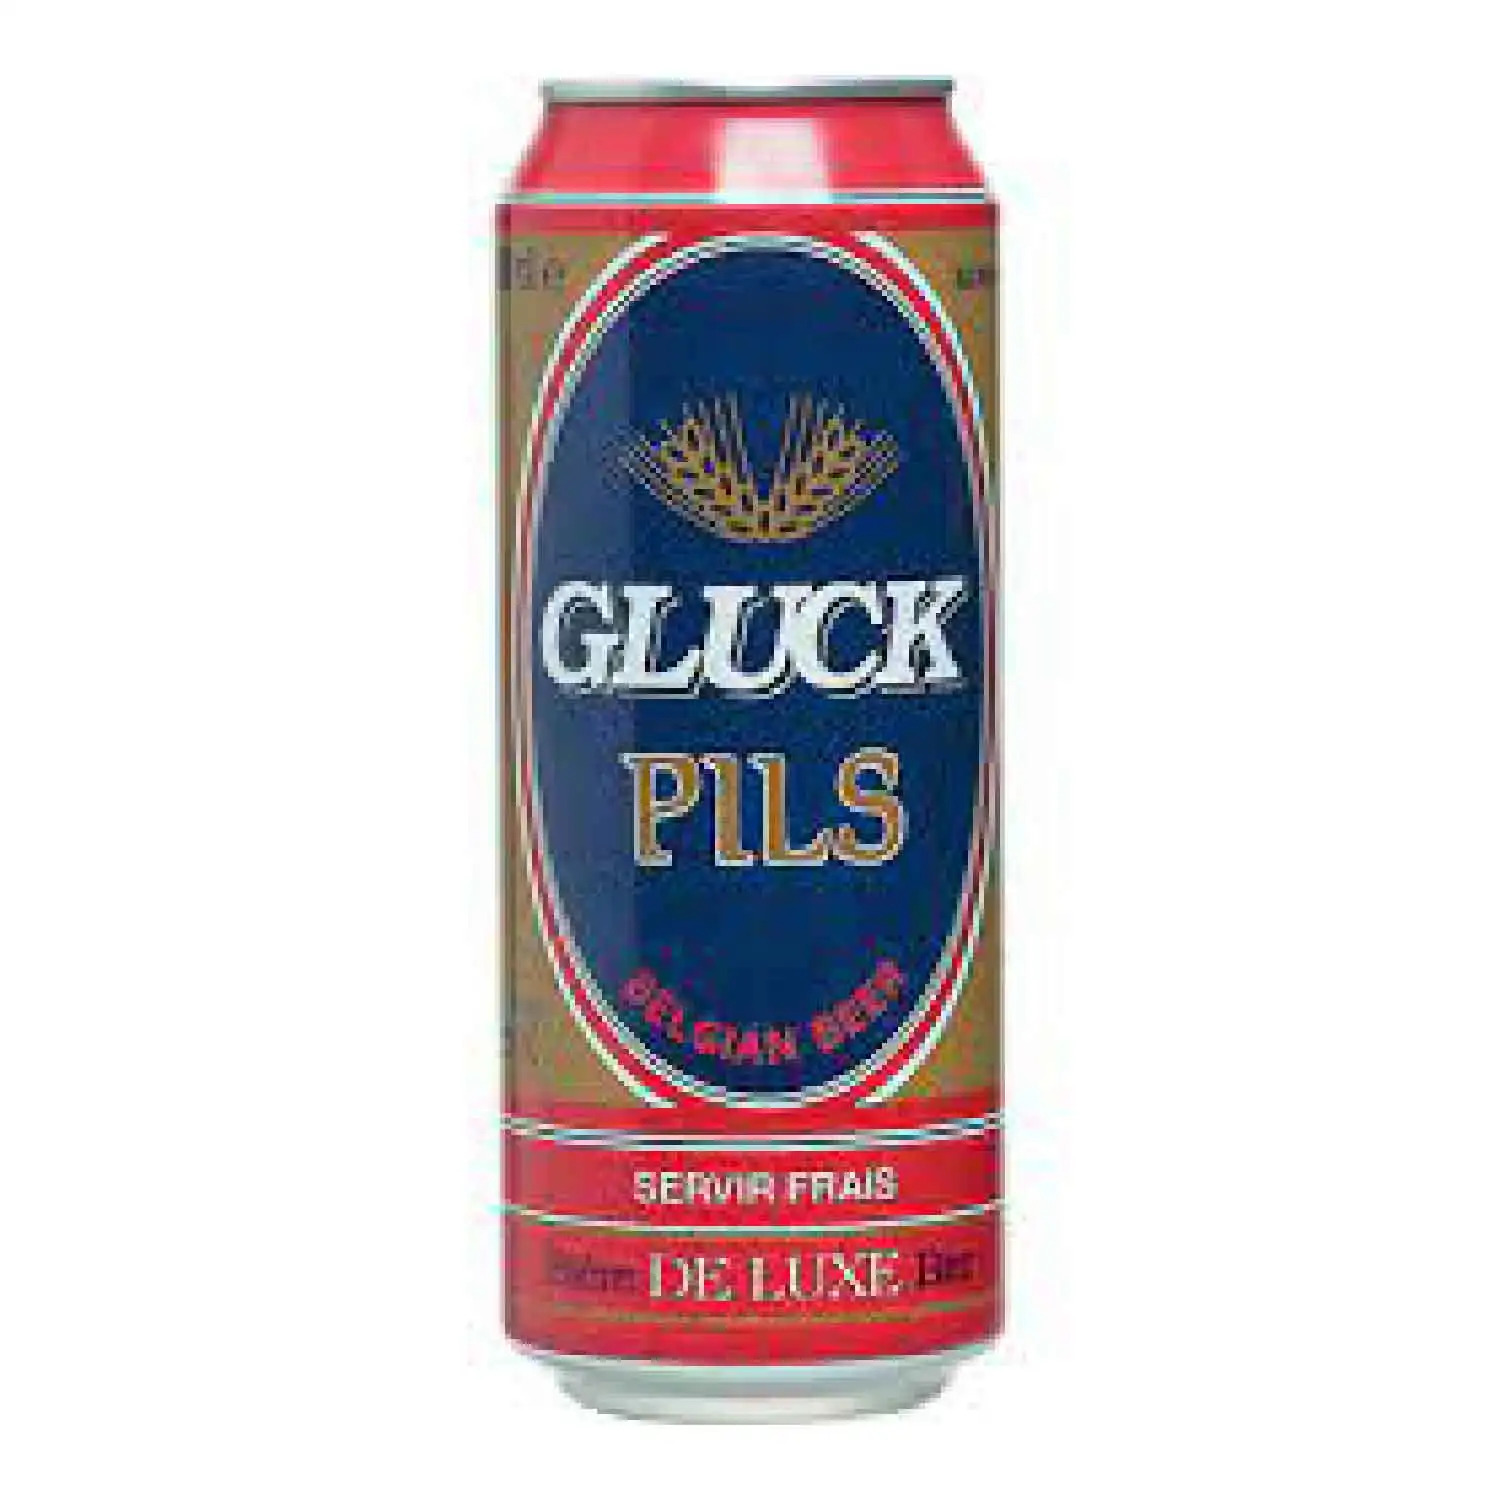 Gluck pils 50cl Alc 5% - Buy at Real Tobacco